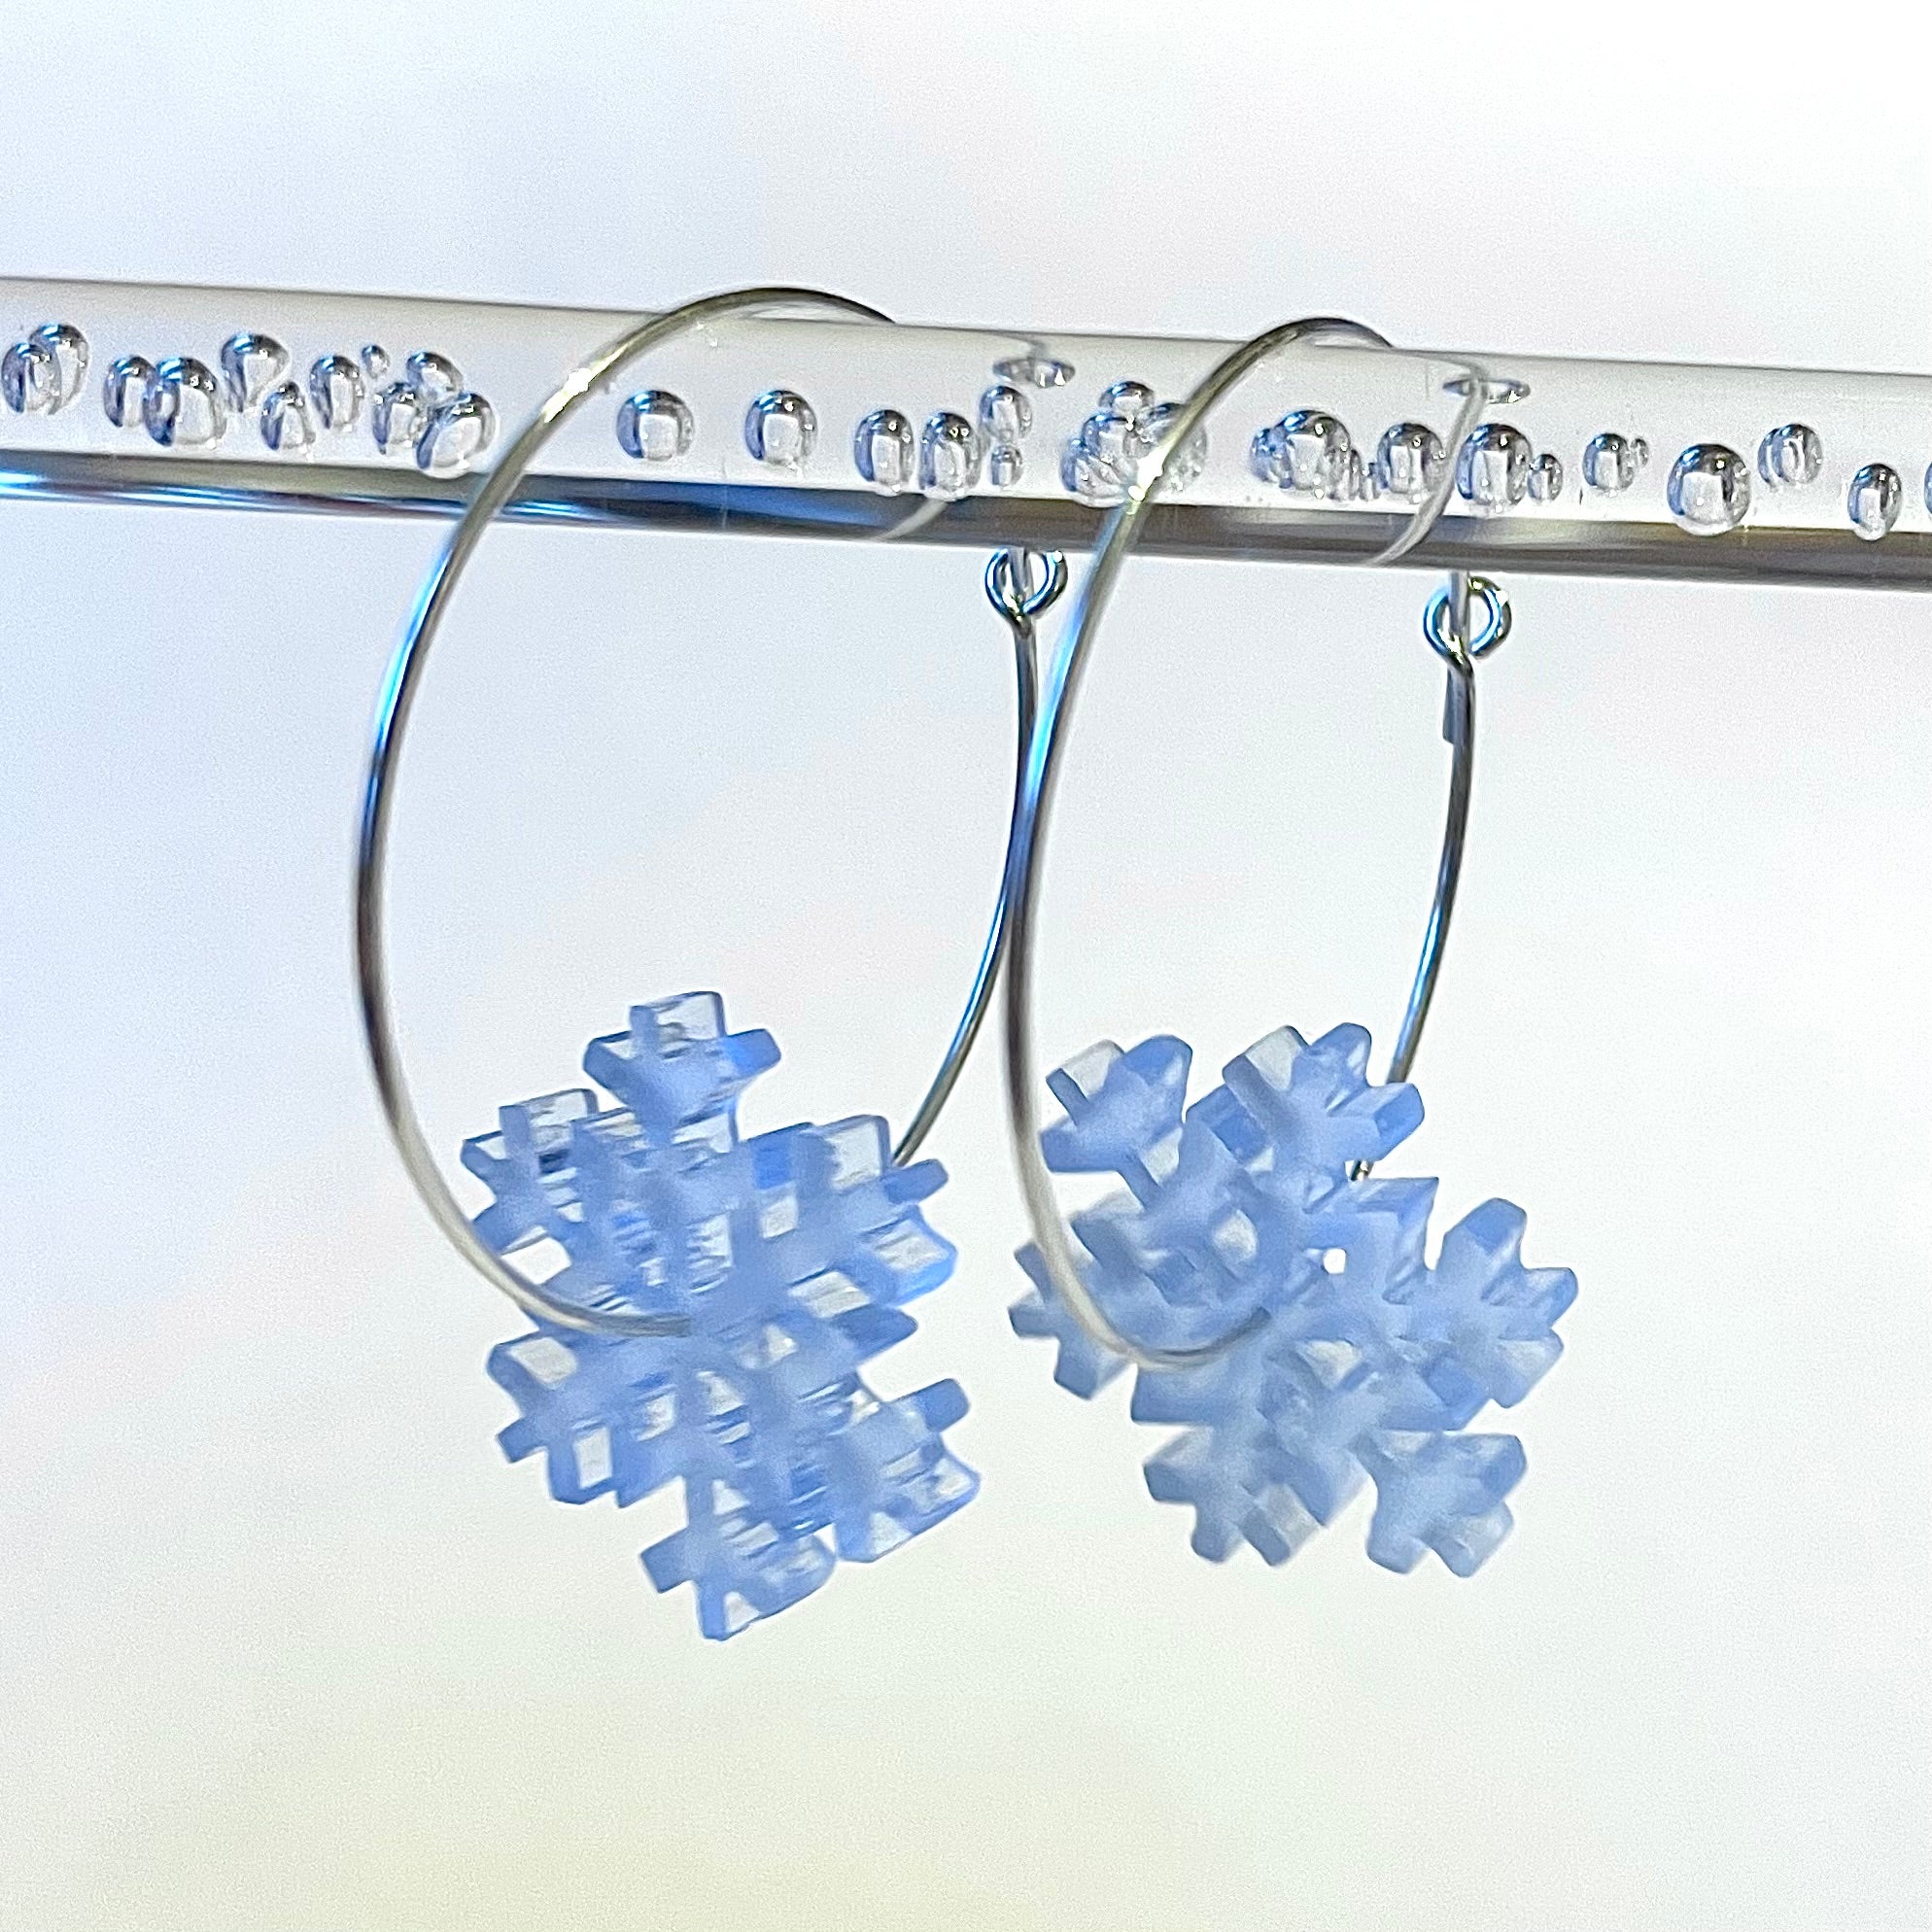 Silver Hoop Earrings with blue frosted snowflakes, by Kate Wimbush Jewellery